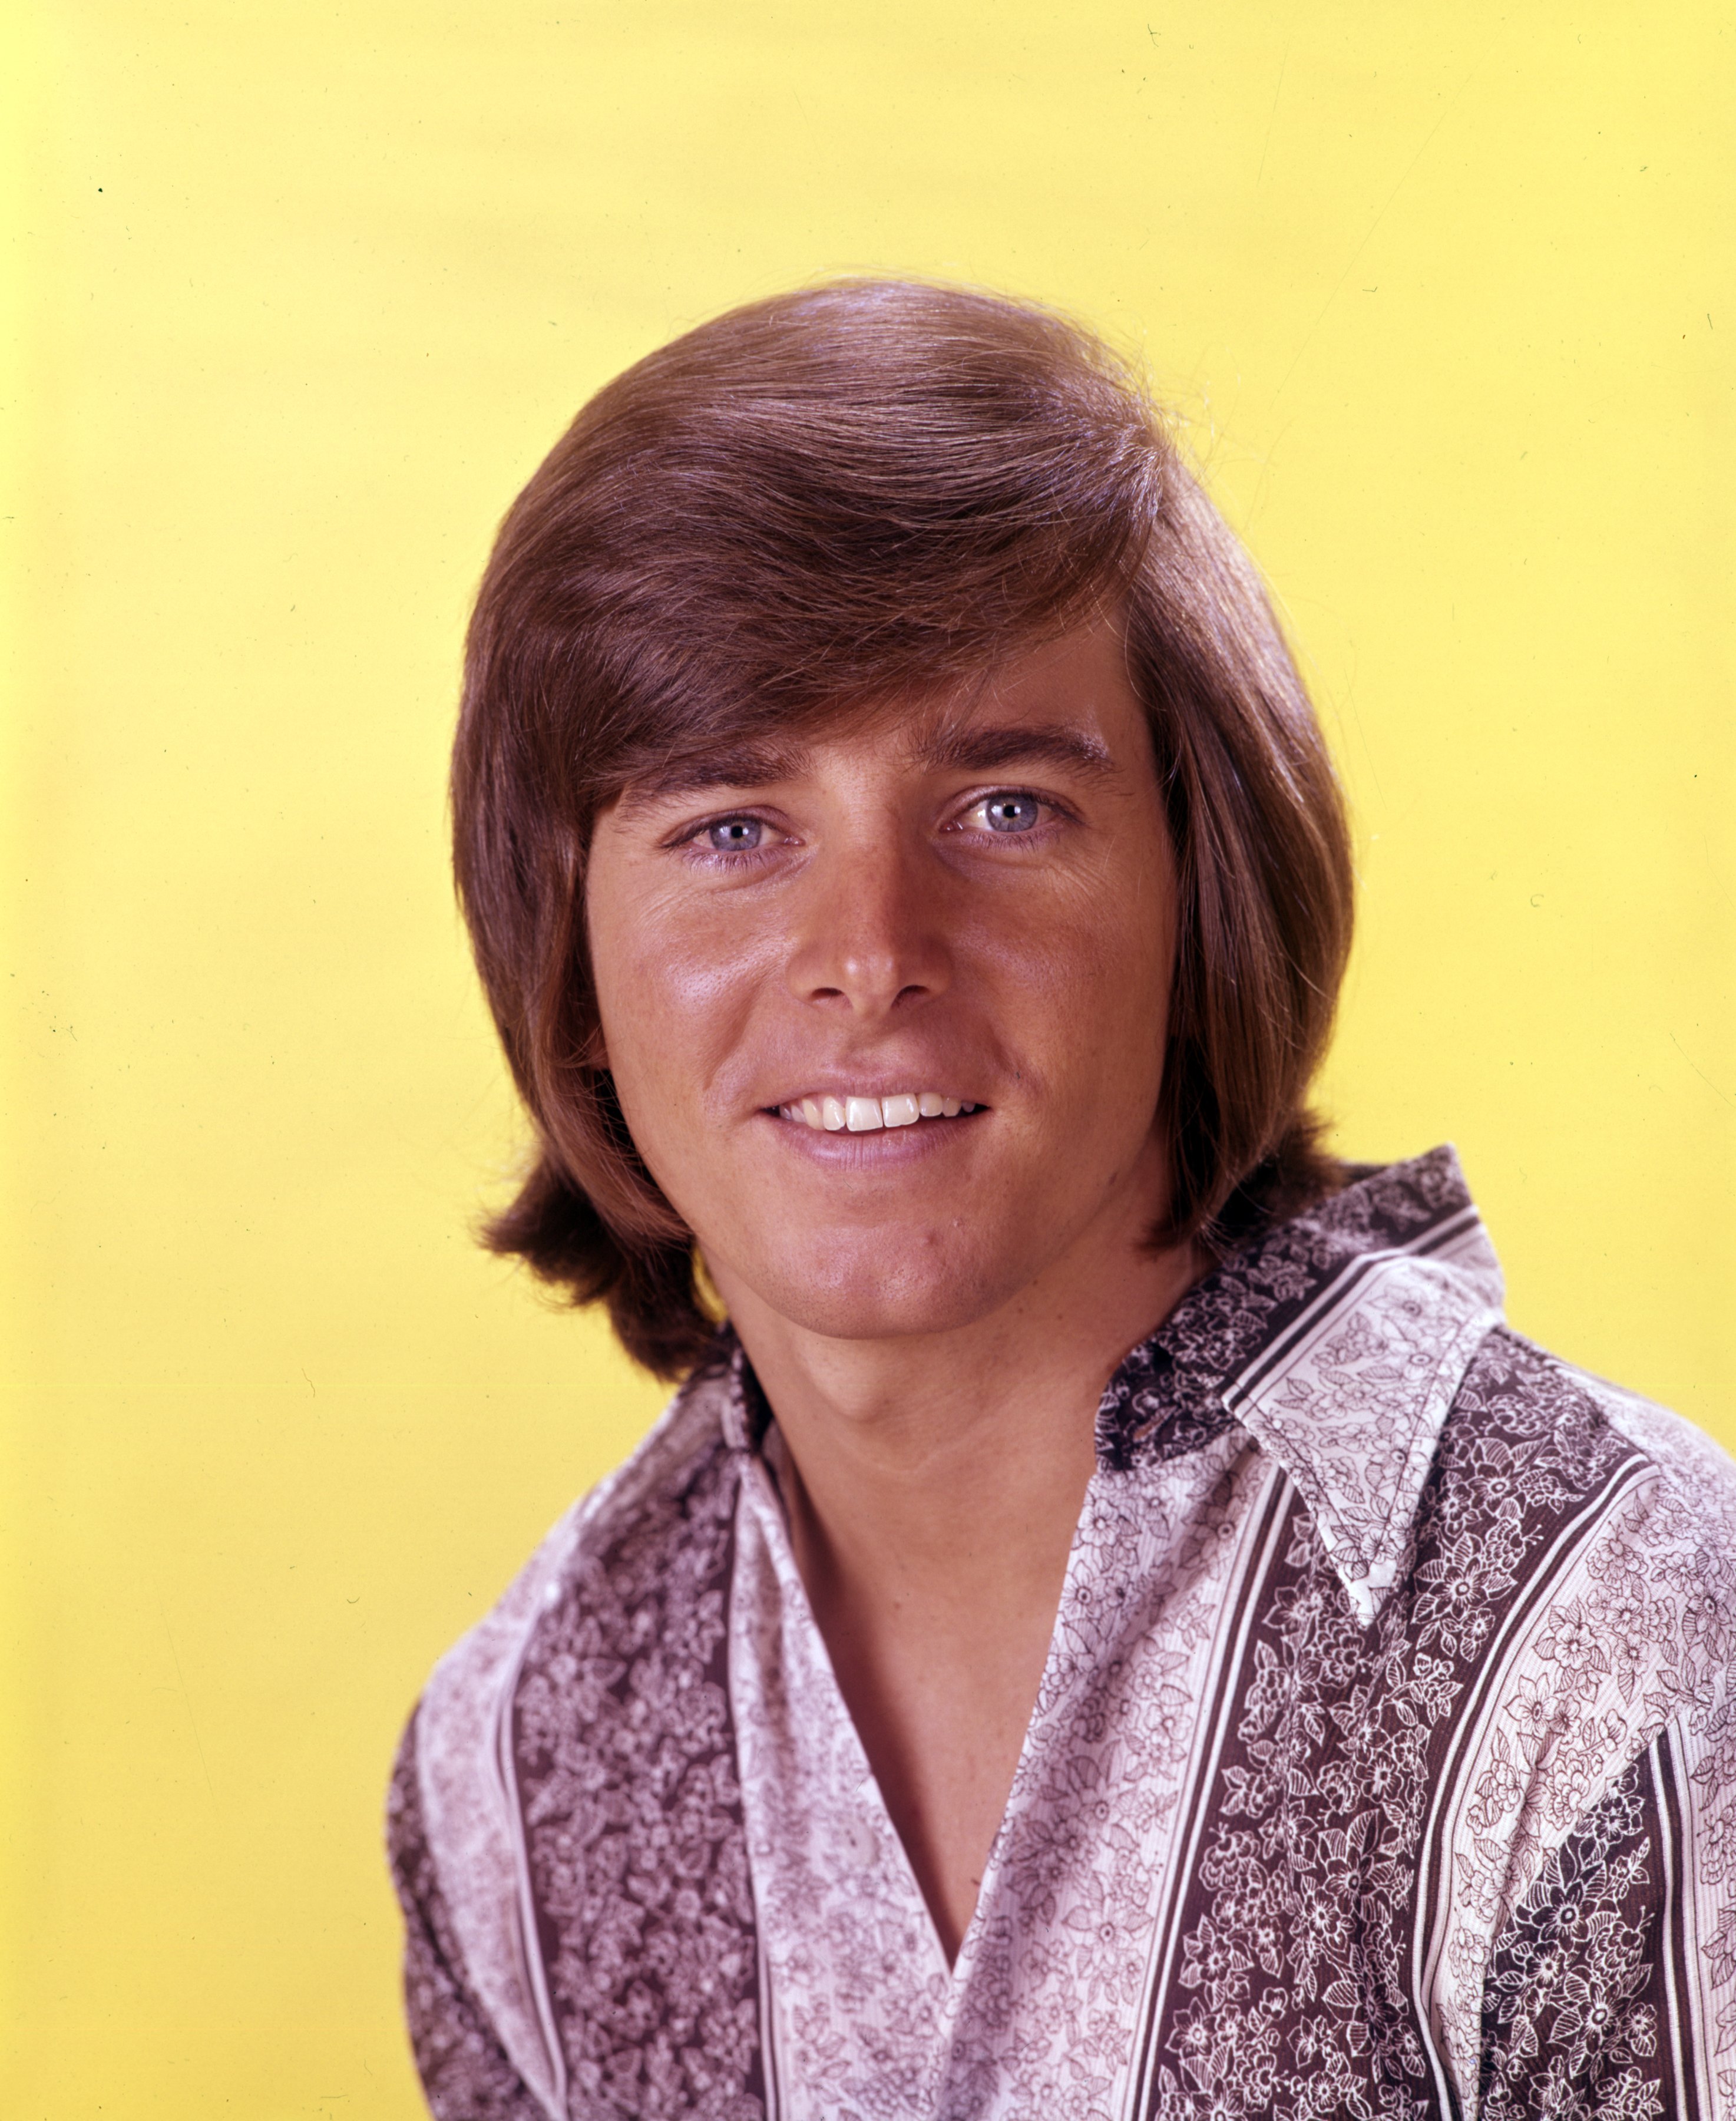 Bobby Sherman on "Getting Together" on April 27, 1971 | Source: Getty Images